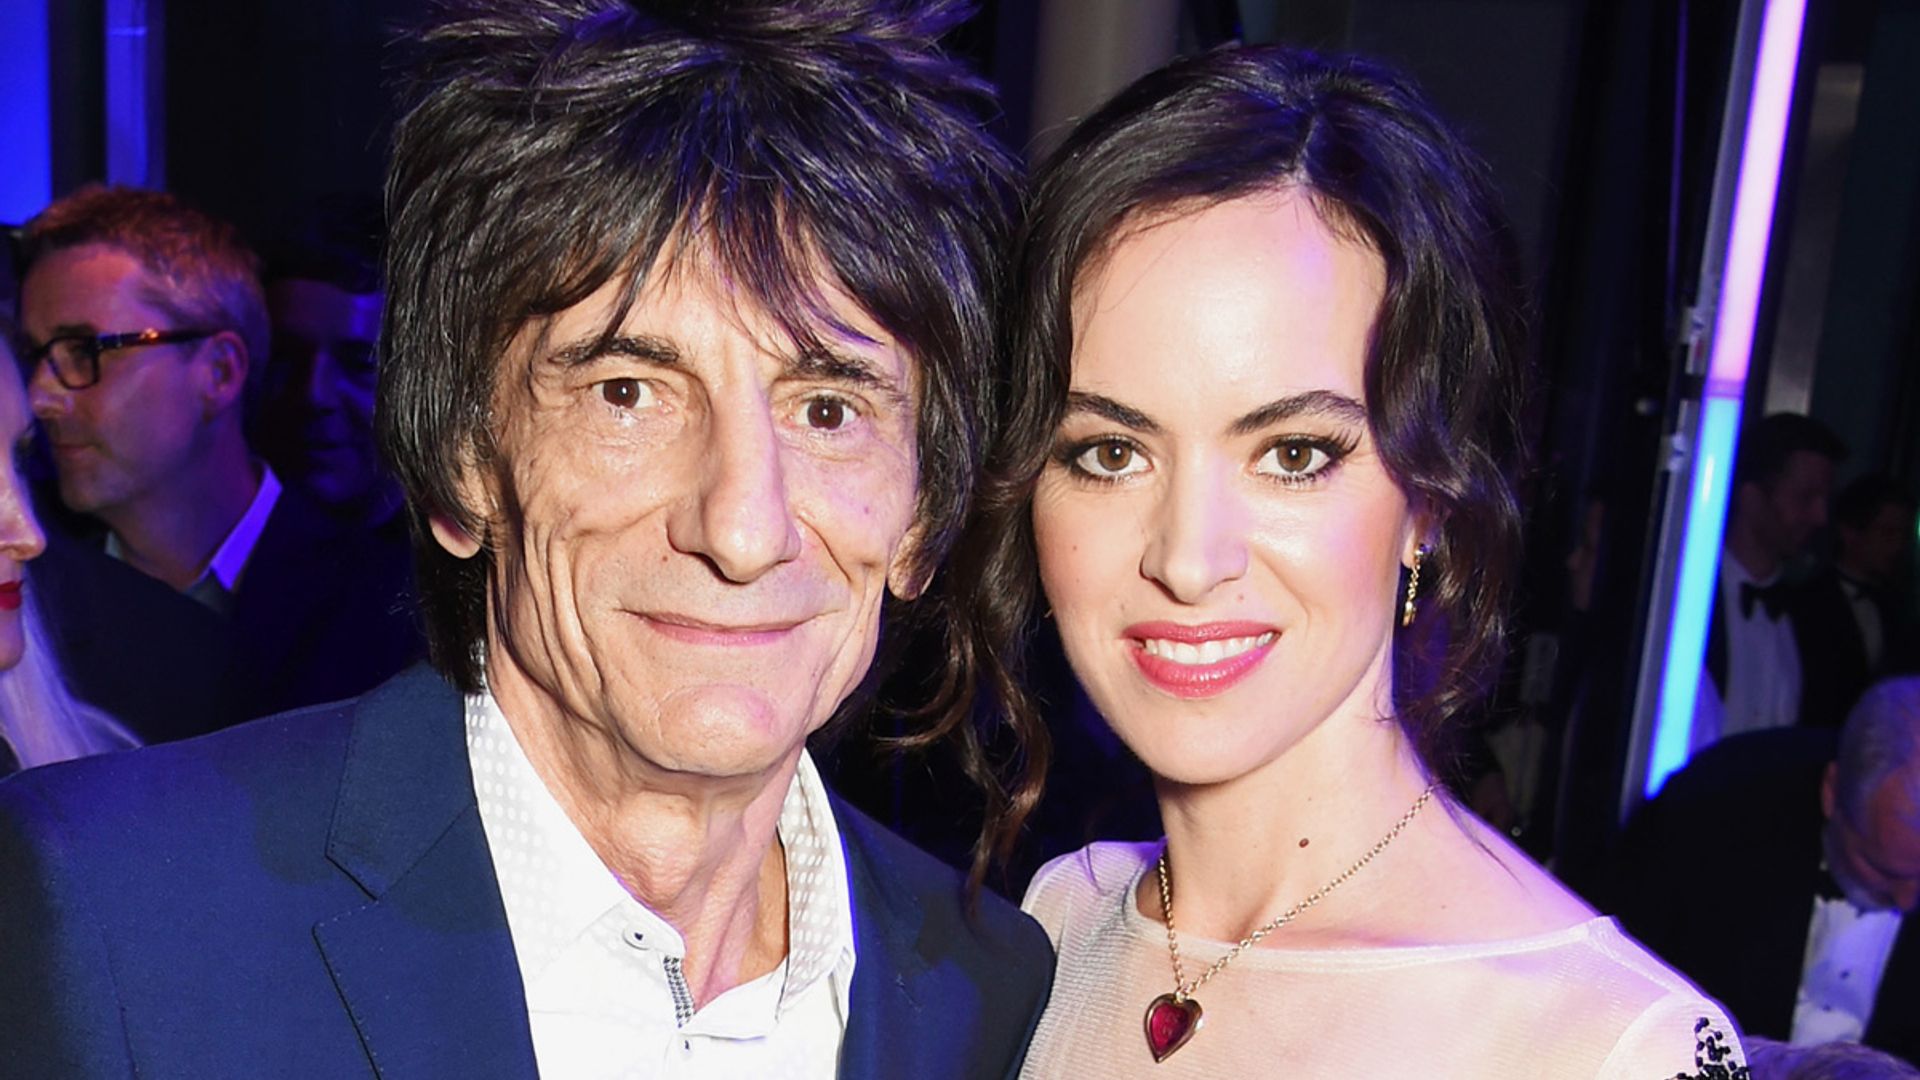 Ronnie Wood shares rare wedding picture with glam wife – wait 'til you see her heartfelt bridal outfit